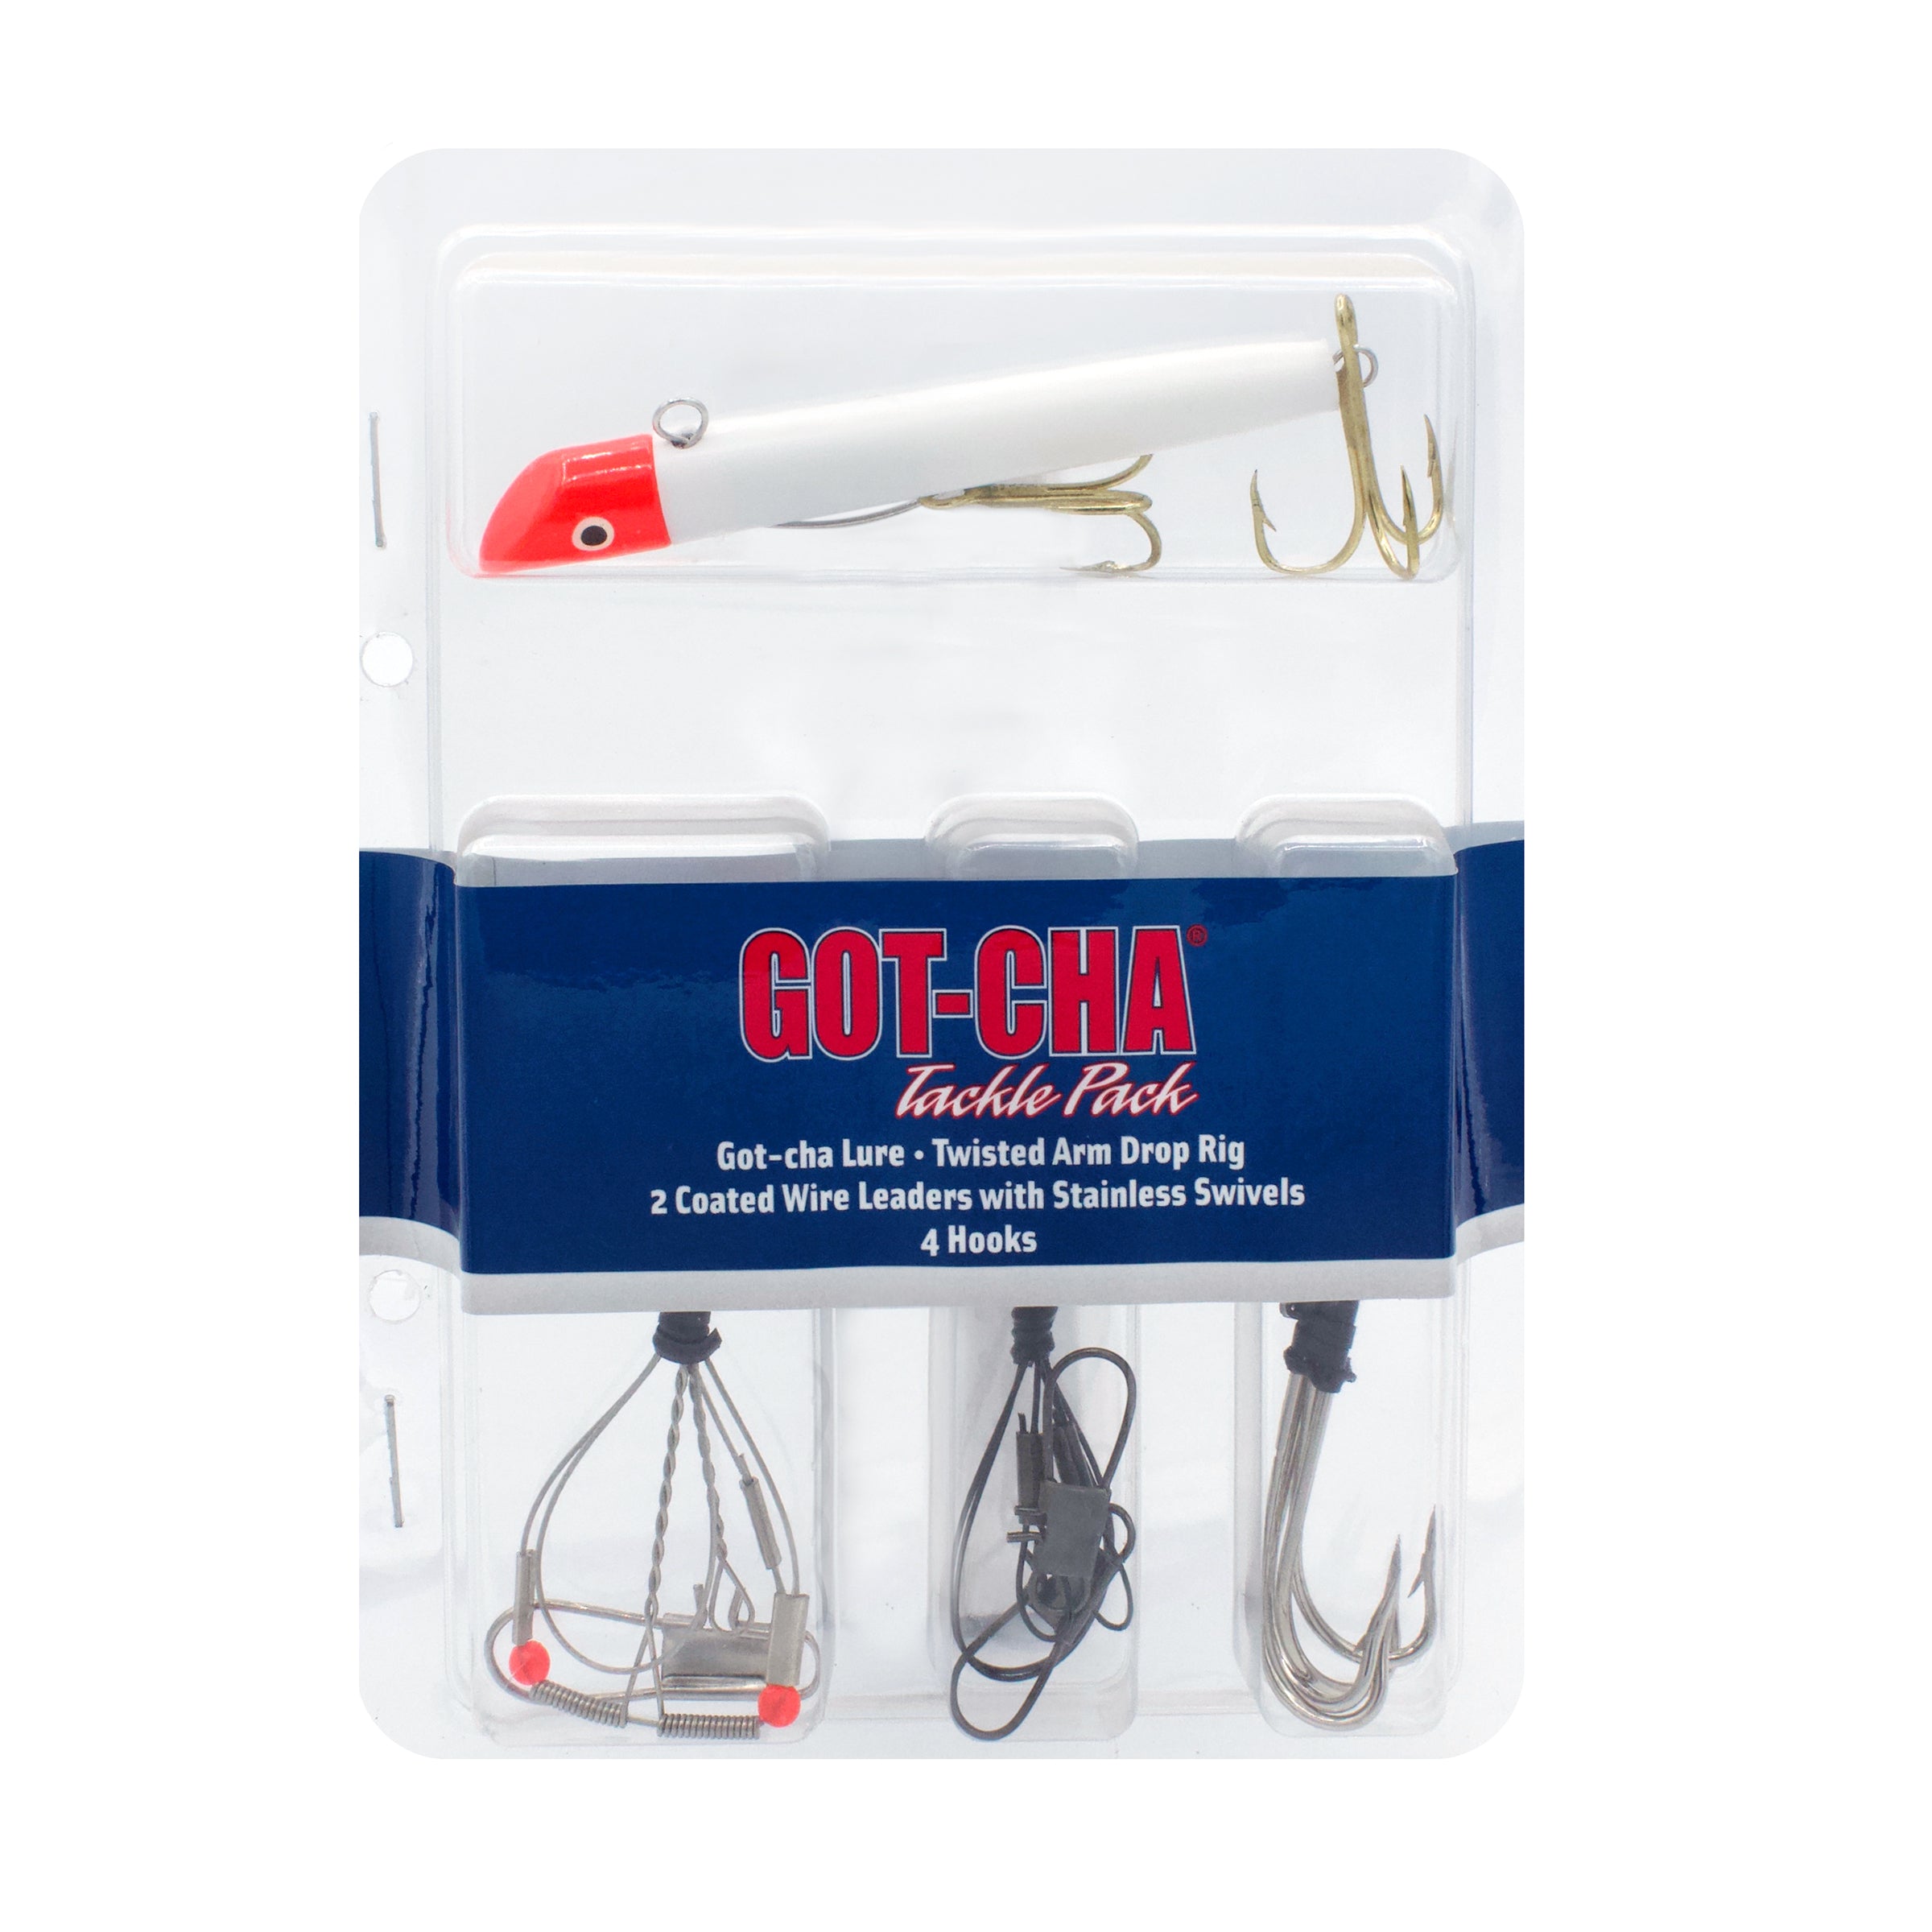 Pier & Surf Combo with Got-cha Plug Tackle Pack